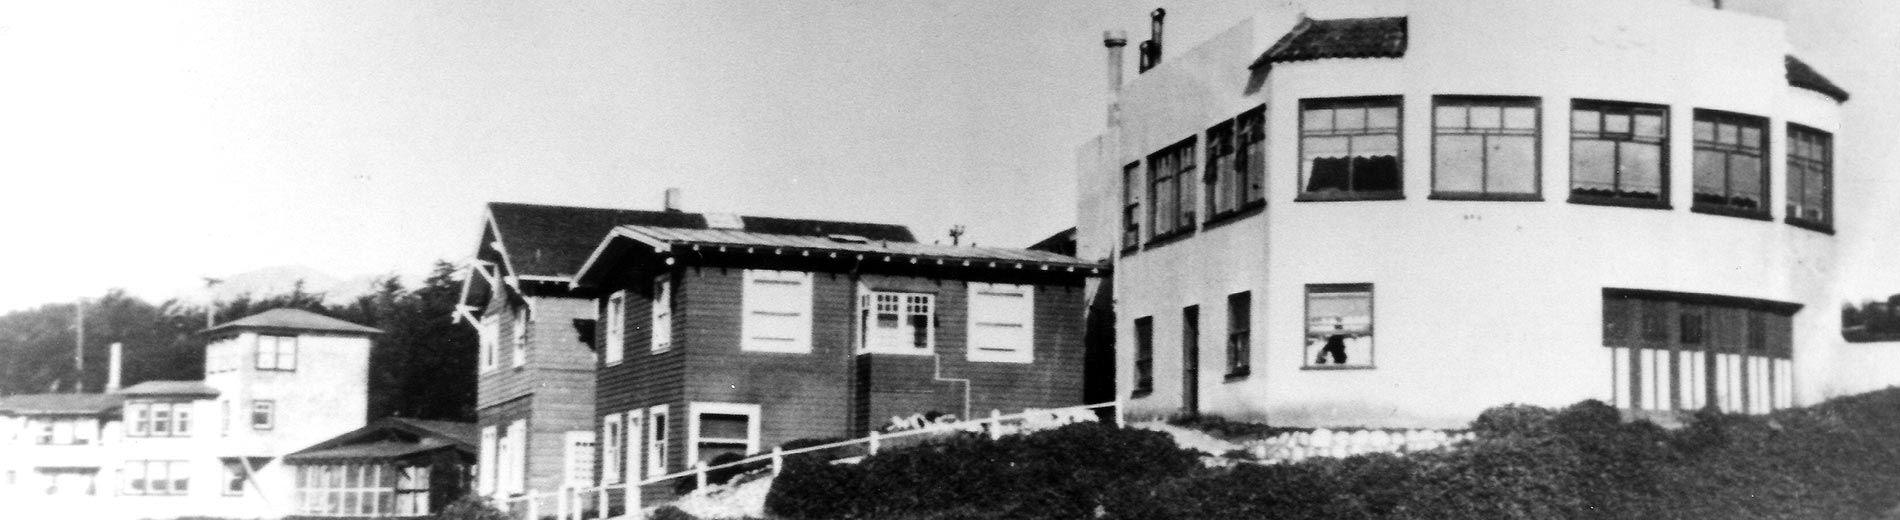 historical photo of the Moss Beach Distillery, a California Point of Historical Interest